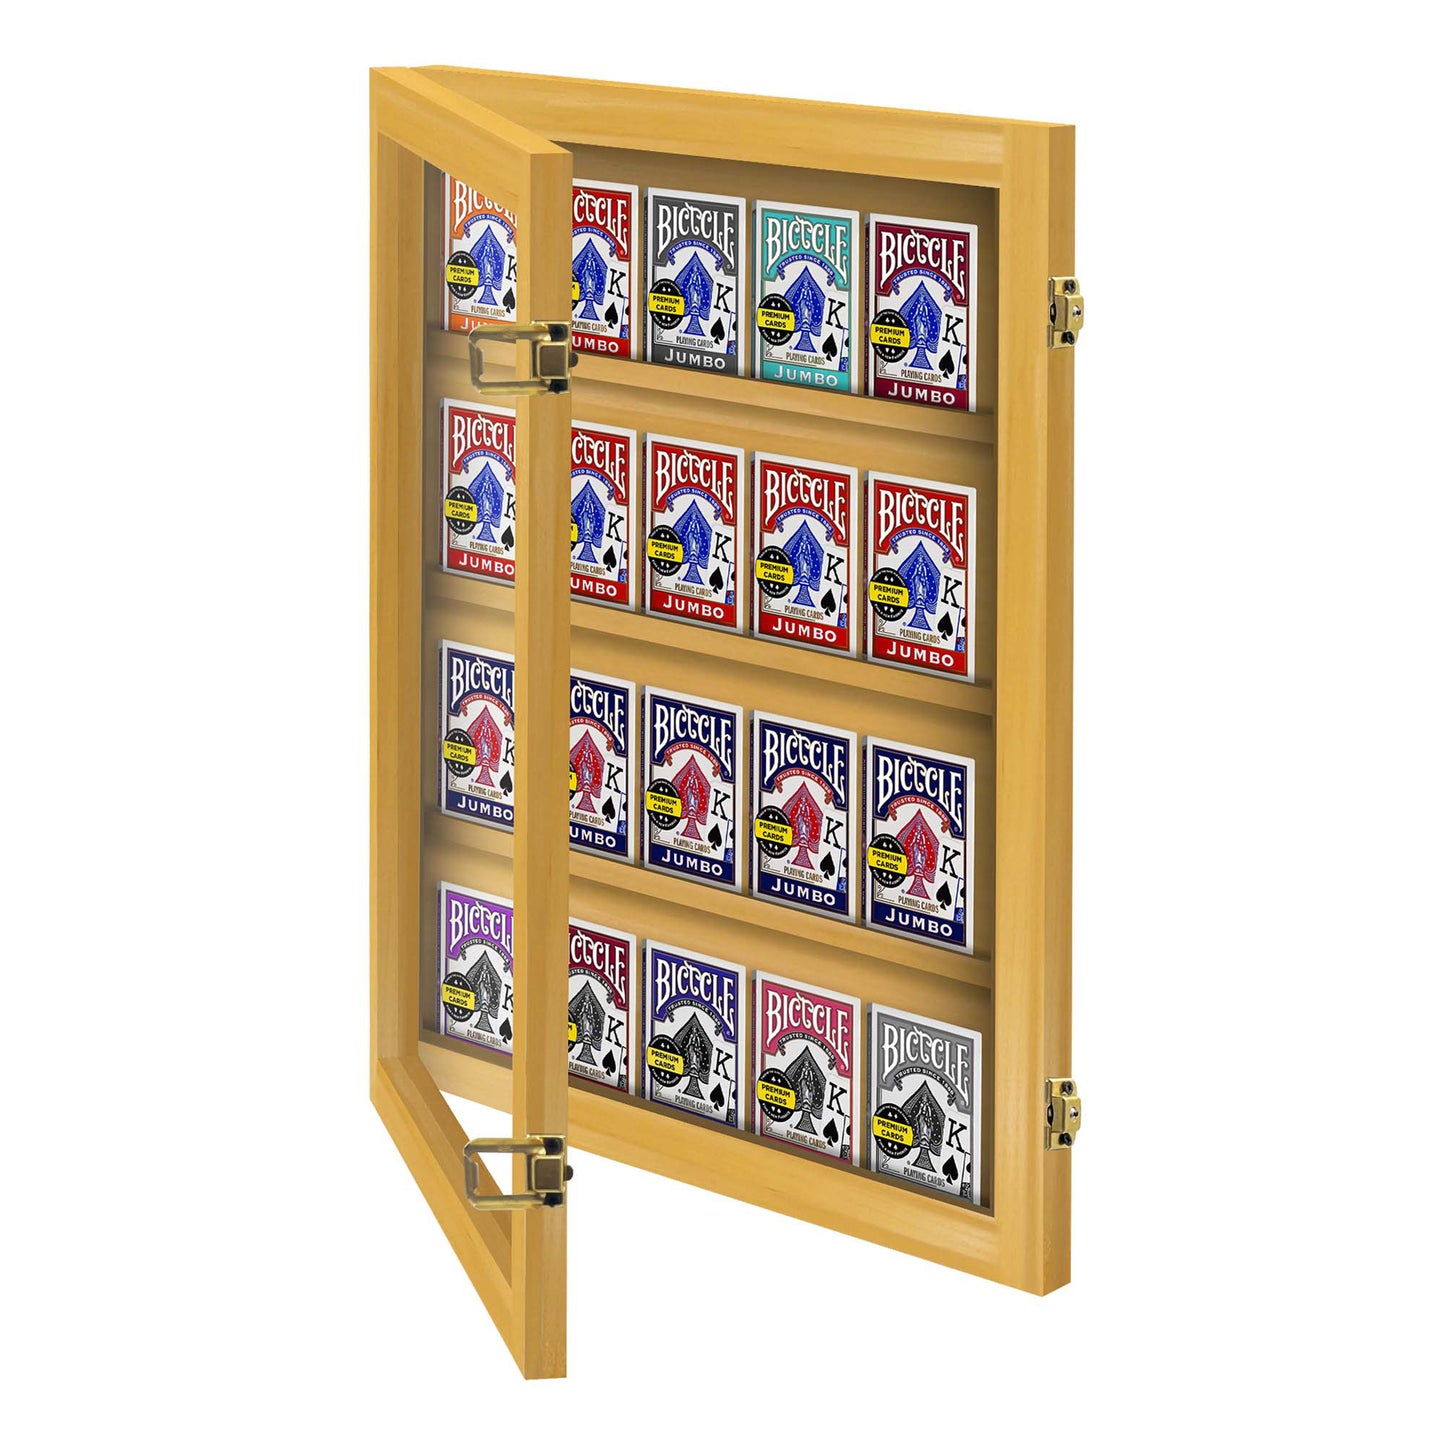 Playing Card Deck Display Case - Holds 20 Decks